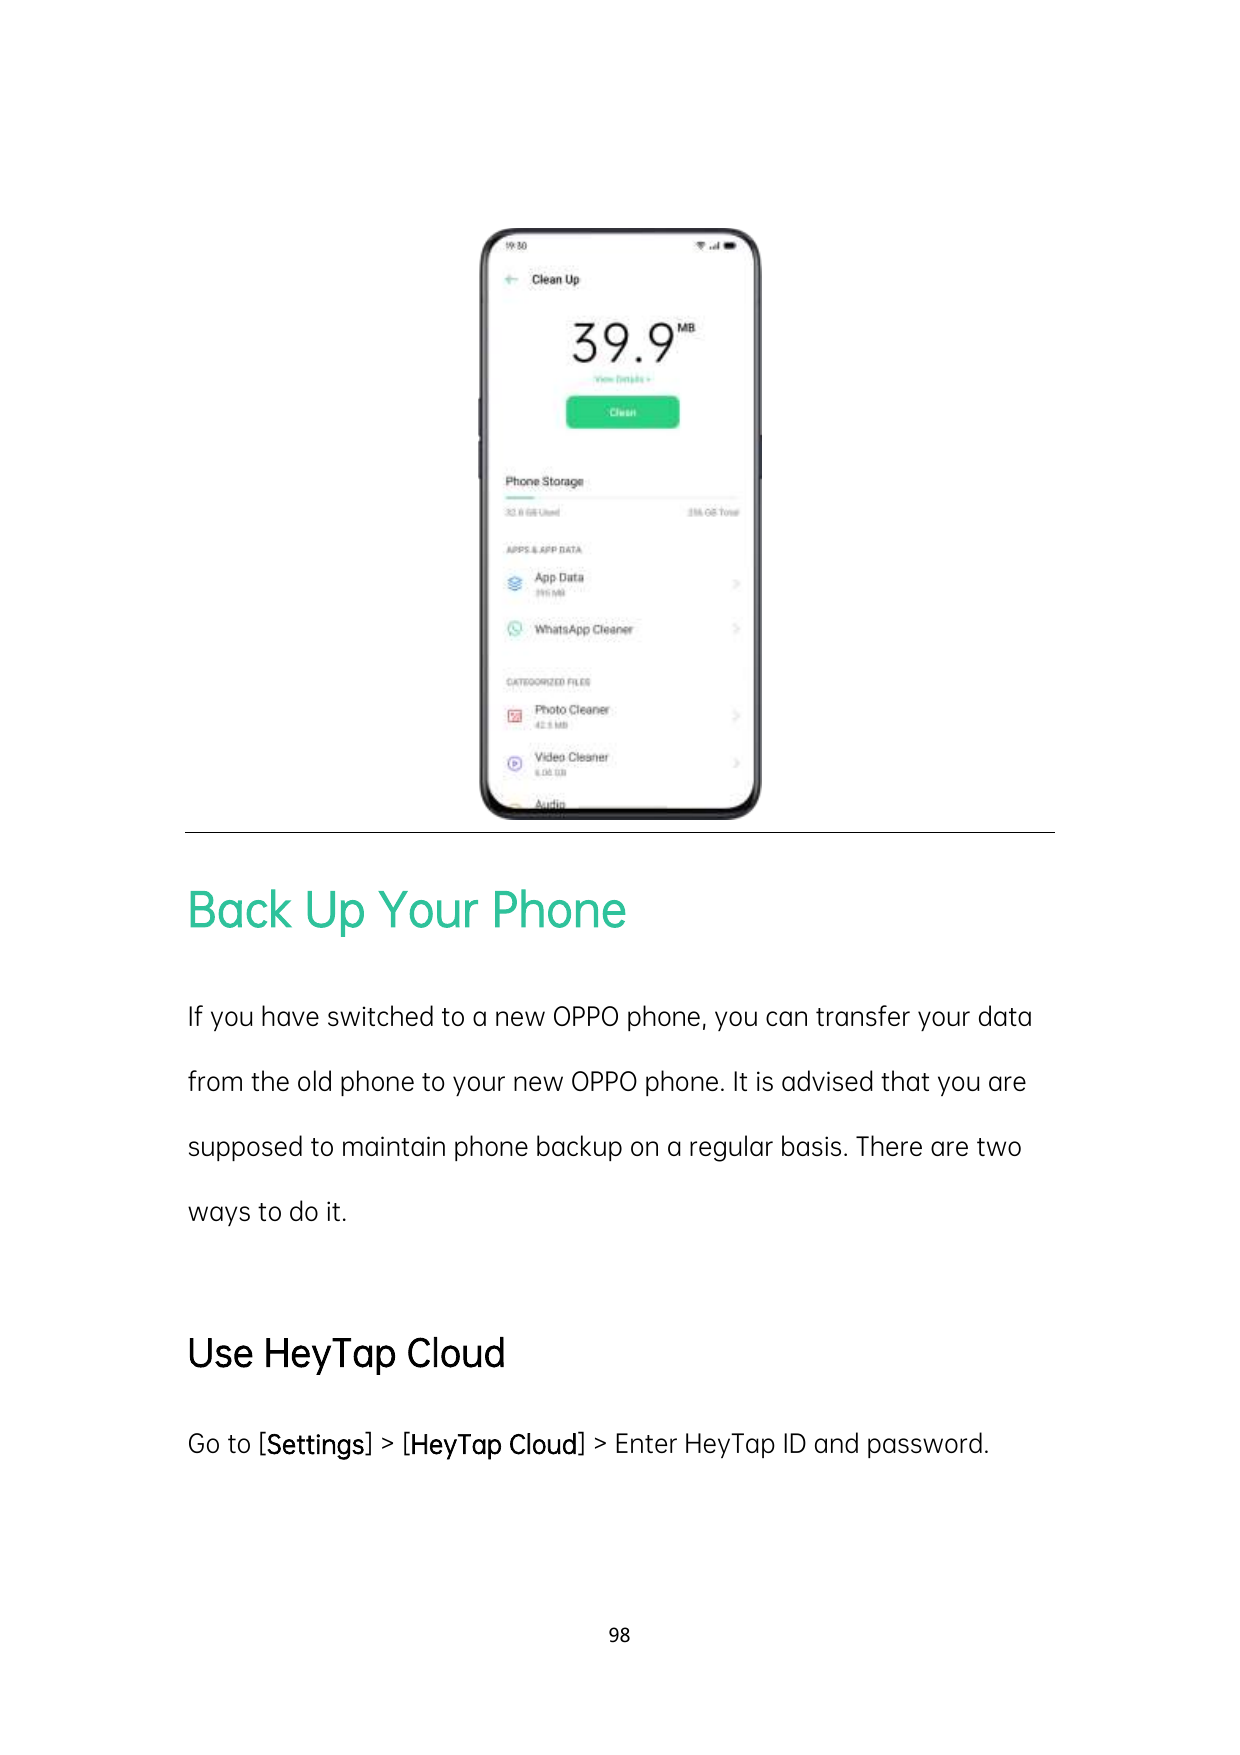 Back Up Your PhoneIf you have switched to a new OPPO phone, you can transfer your datafrom the old phone to your new OPPO phone.